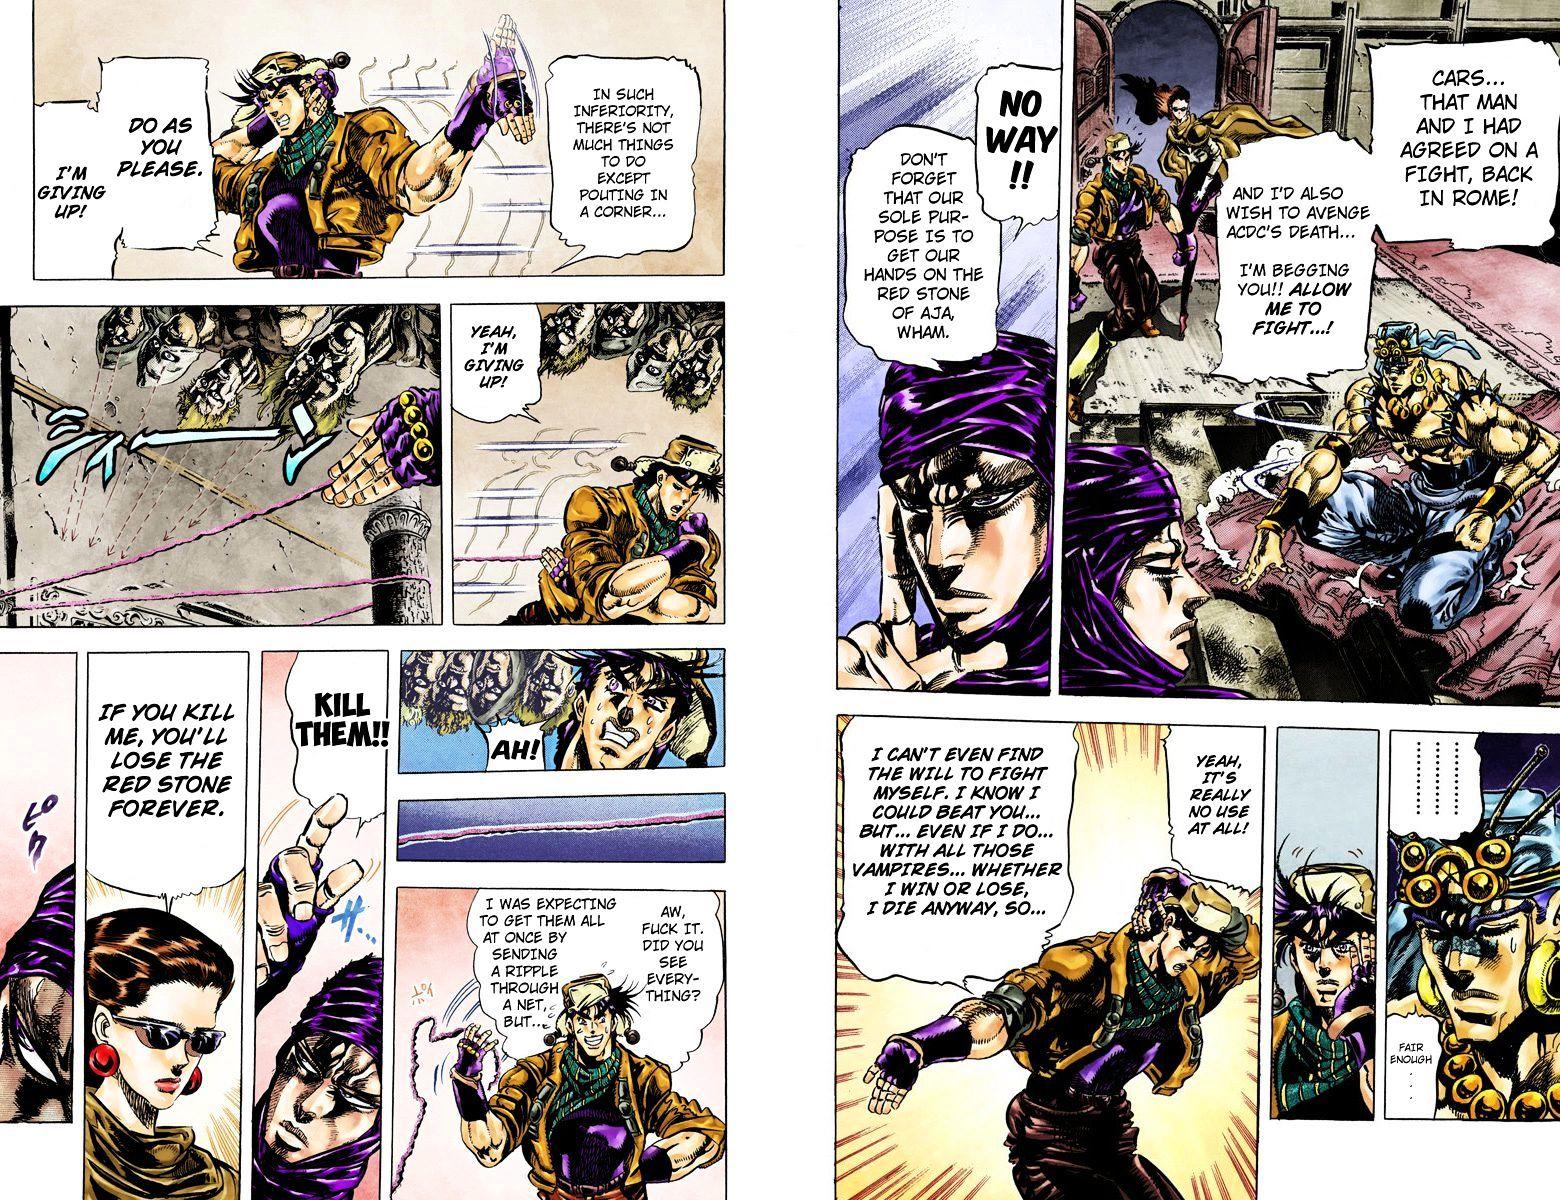 Jojo's Bizarre Adventure Vol.10 Chapter 95 : The One Hundred Vs Two Strategy (Official Color Scans) page 7 - 